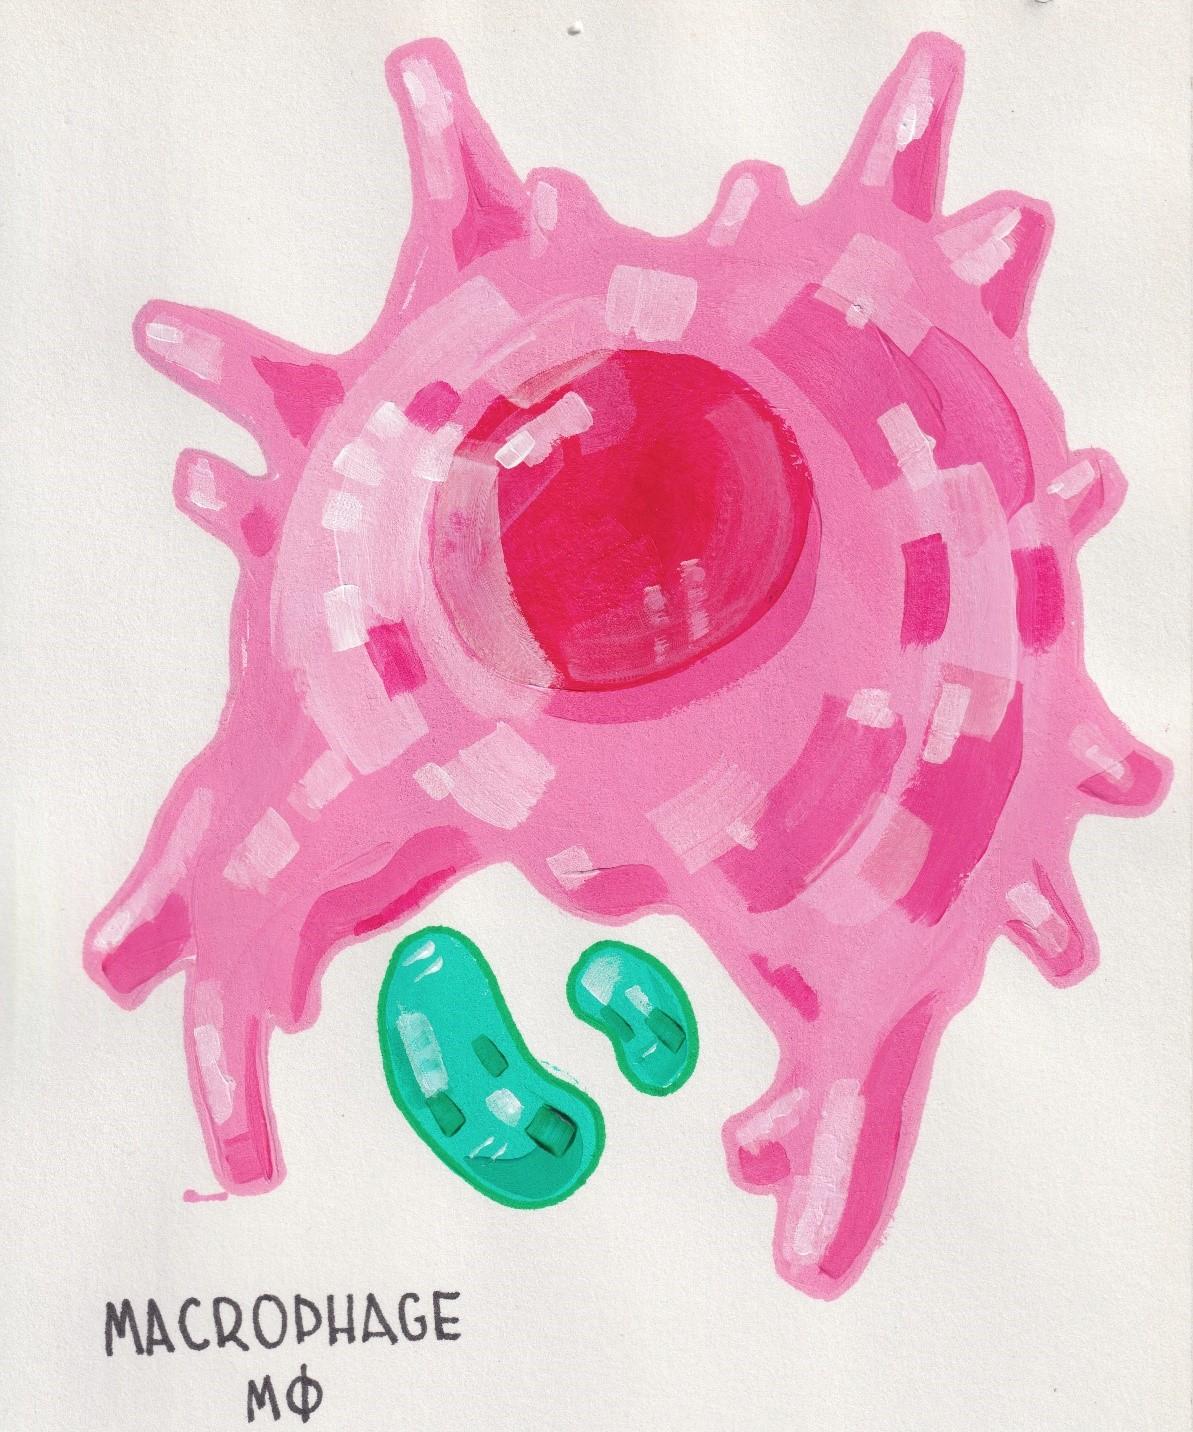 Infectious macrophage